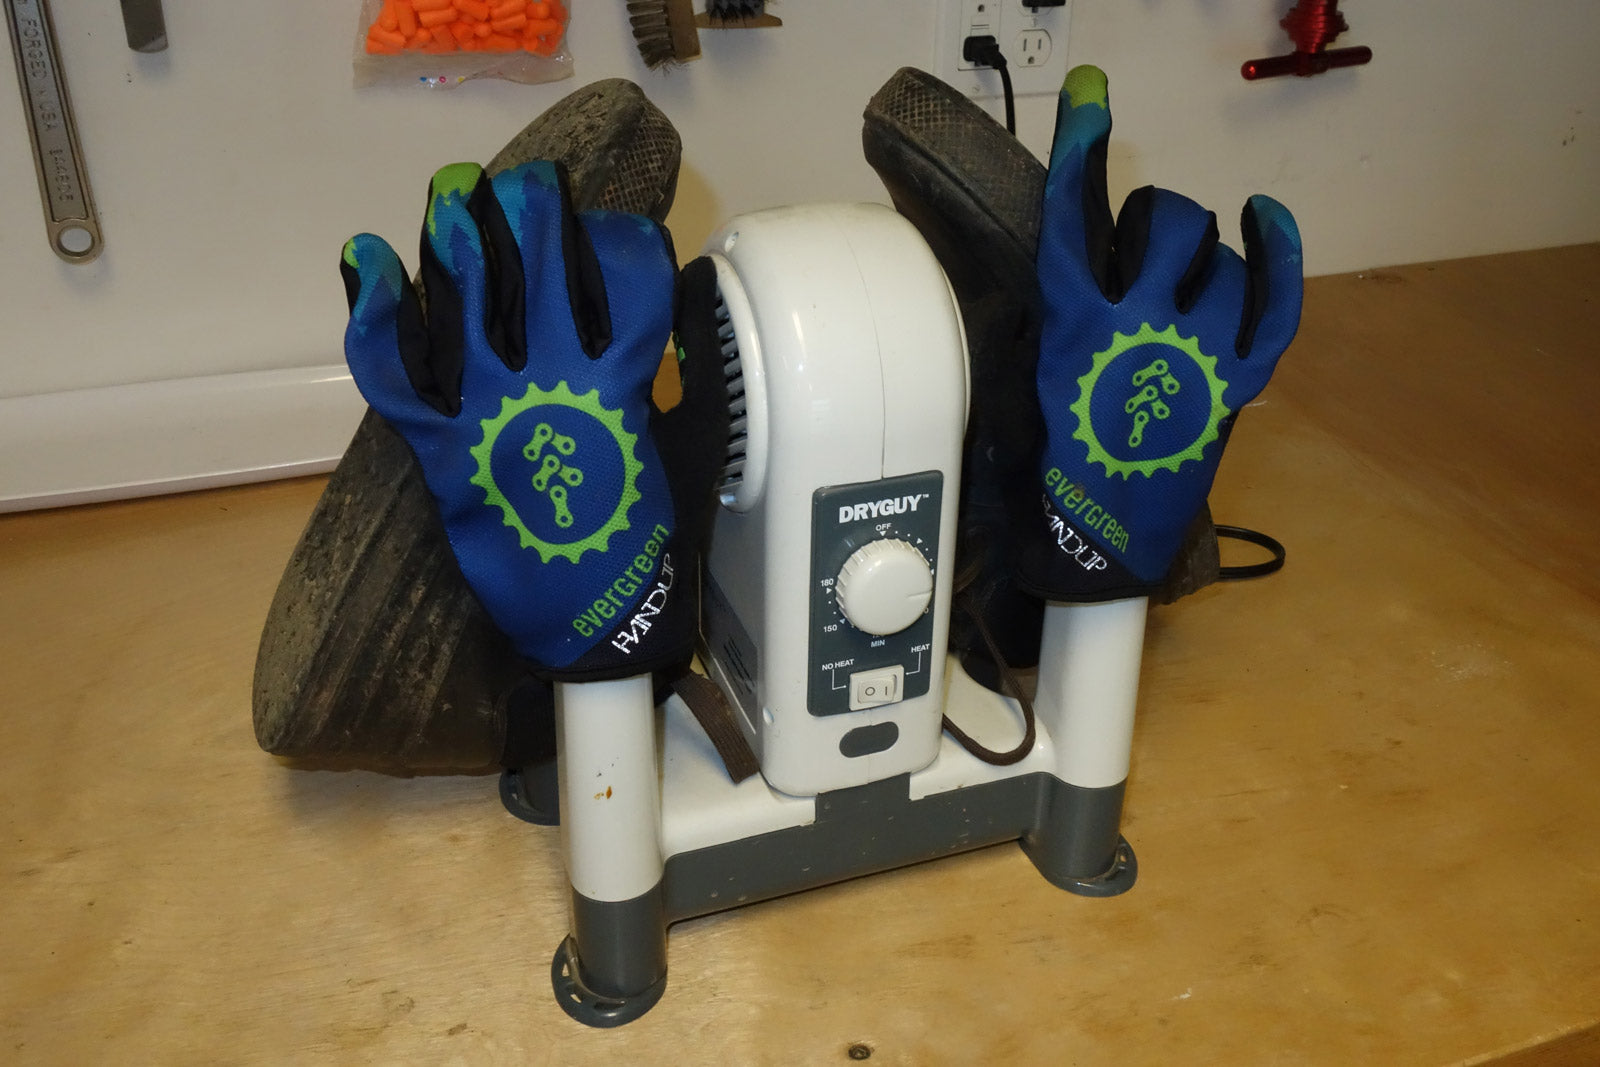 Boot dryer from DryGuy